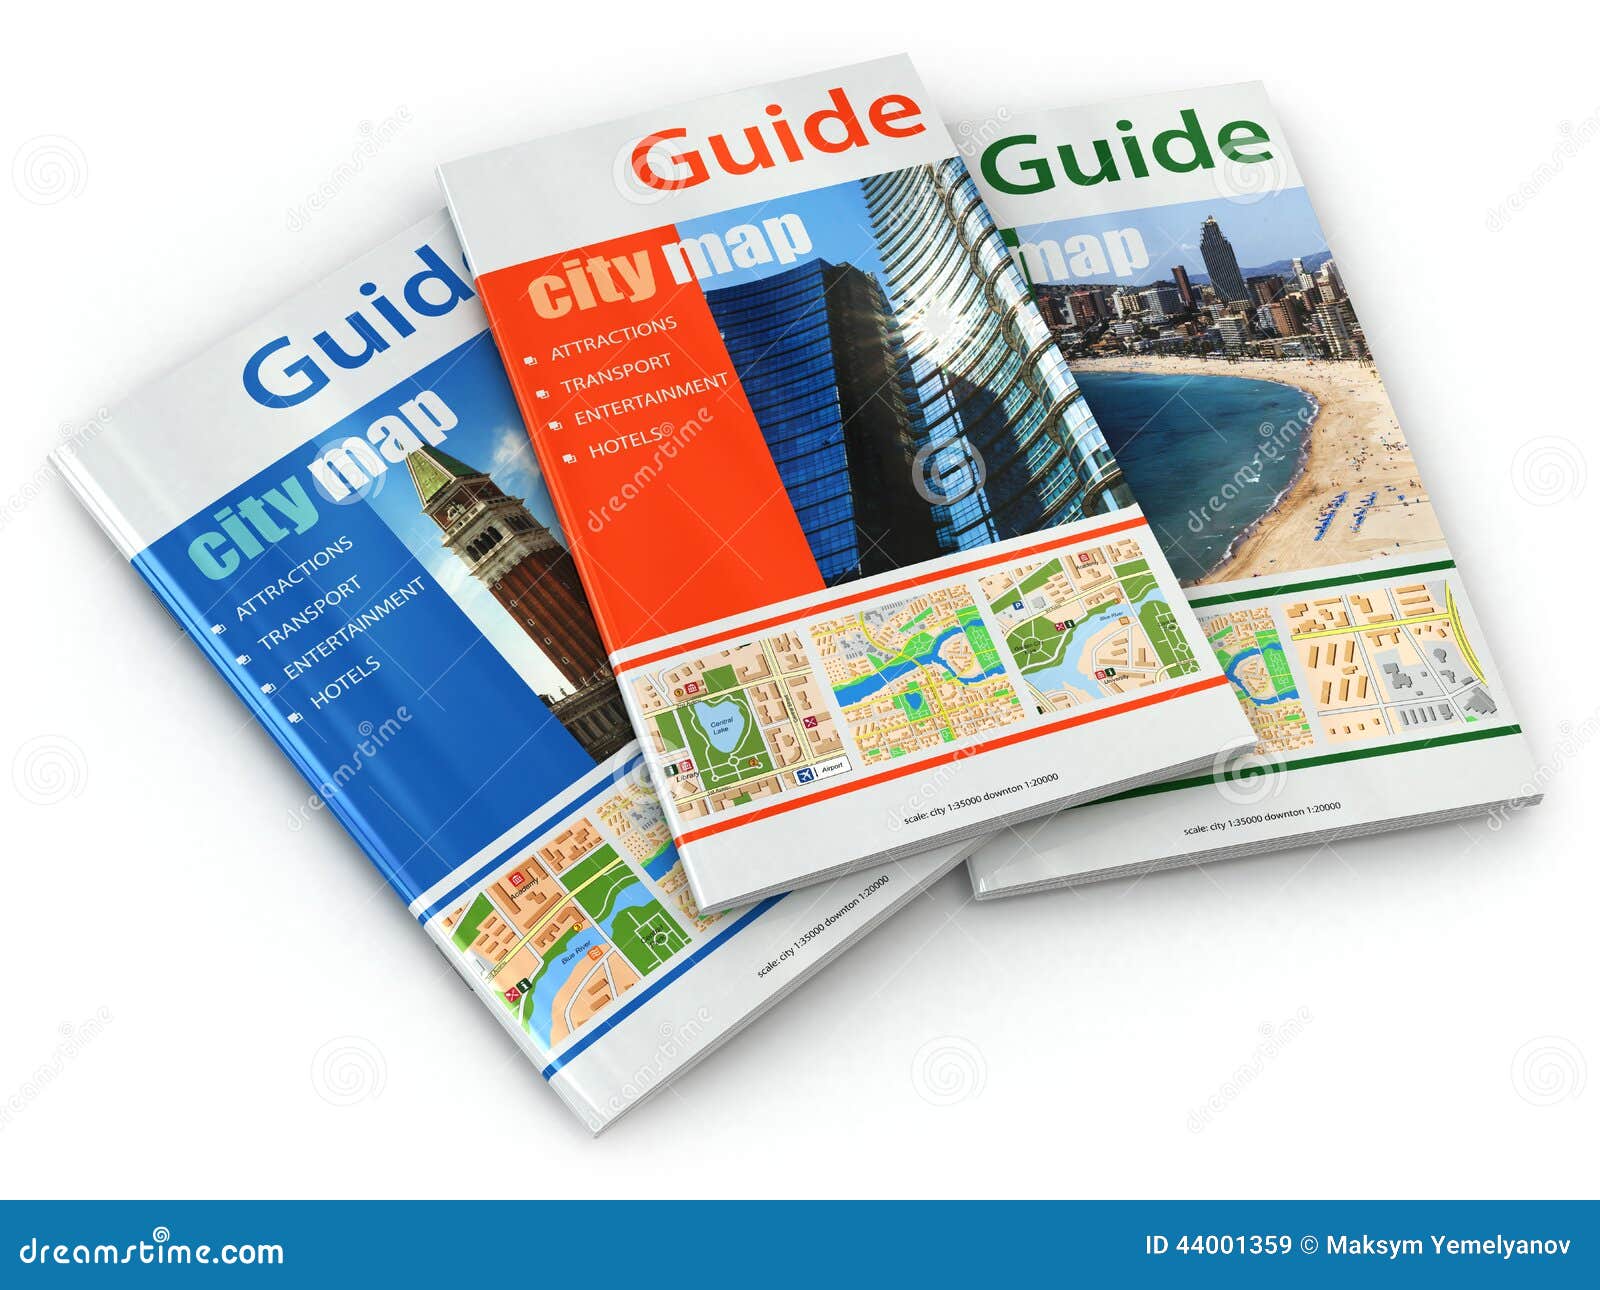 travel guide clipart - photo #3